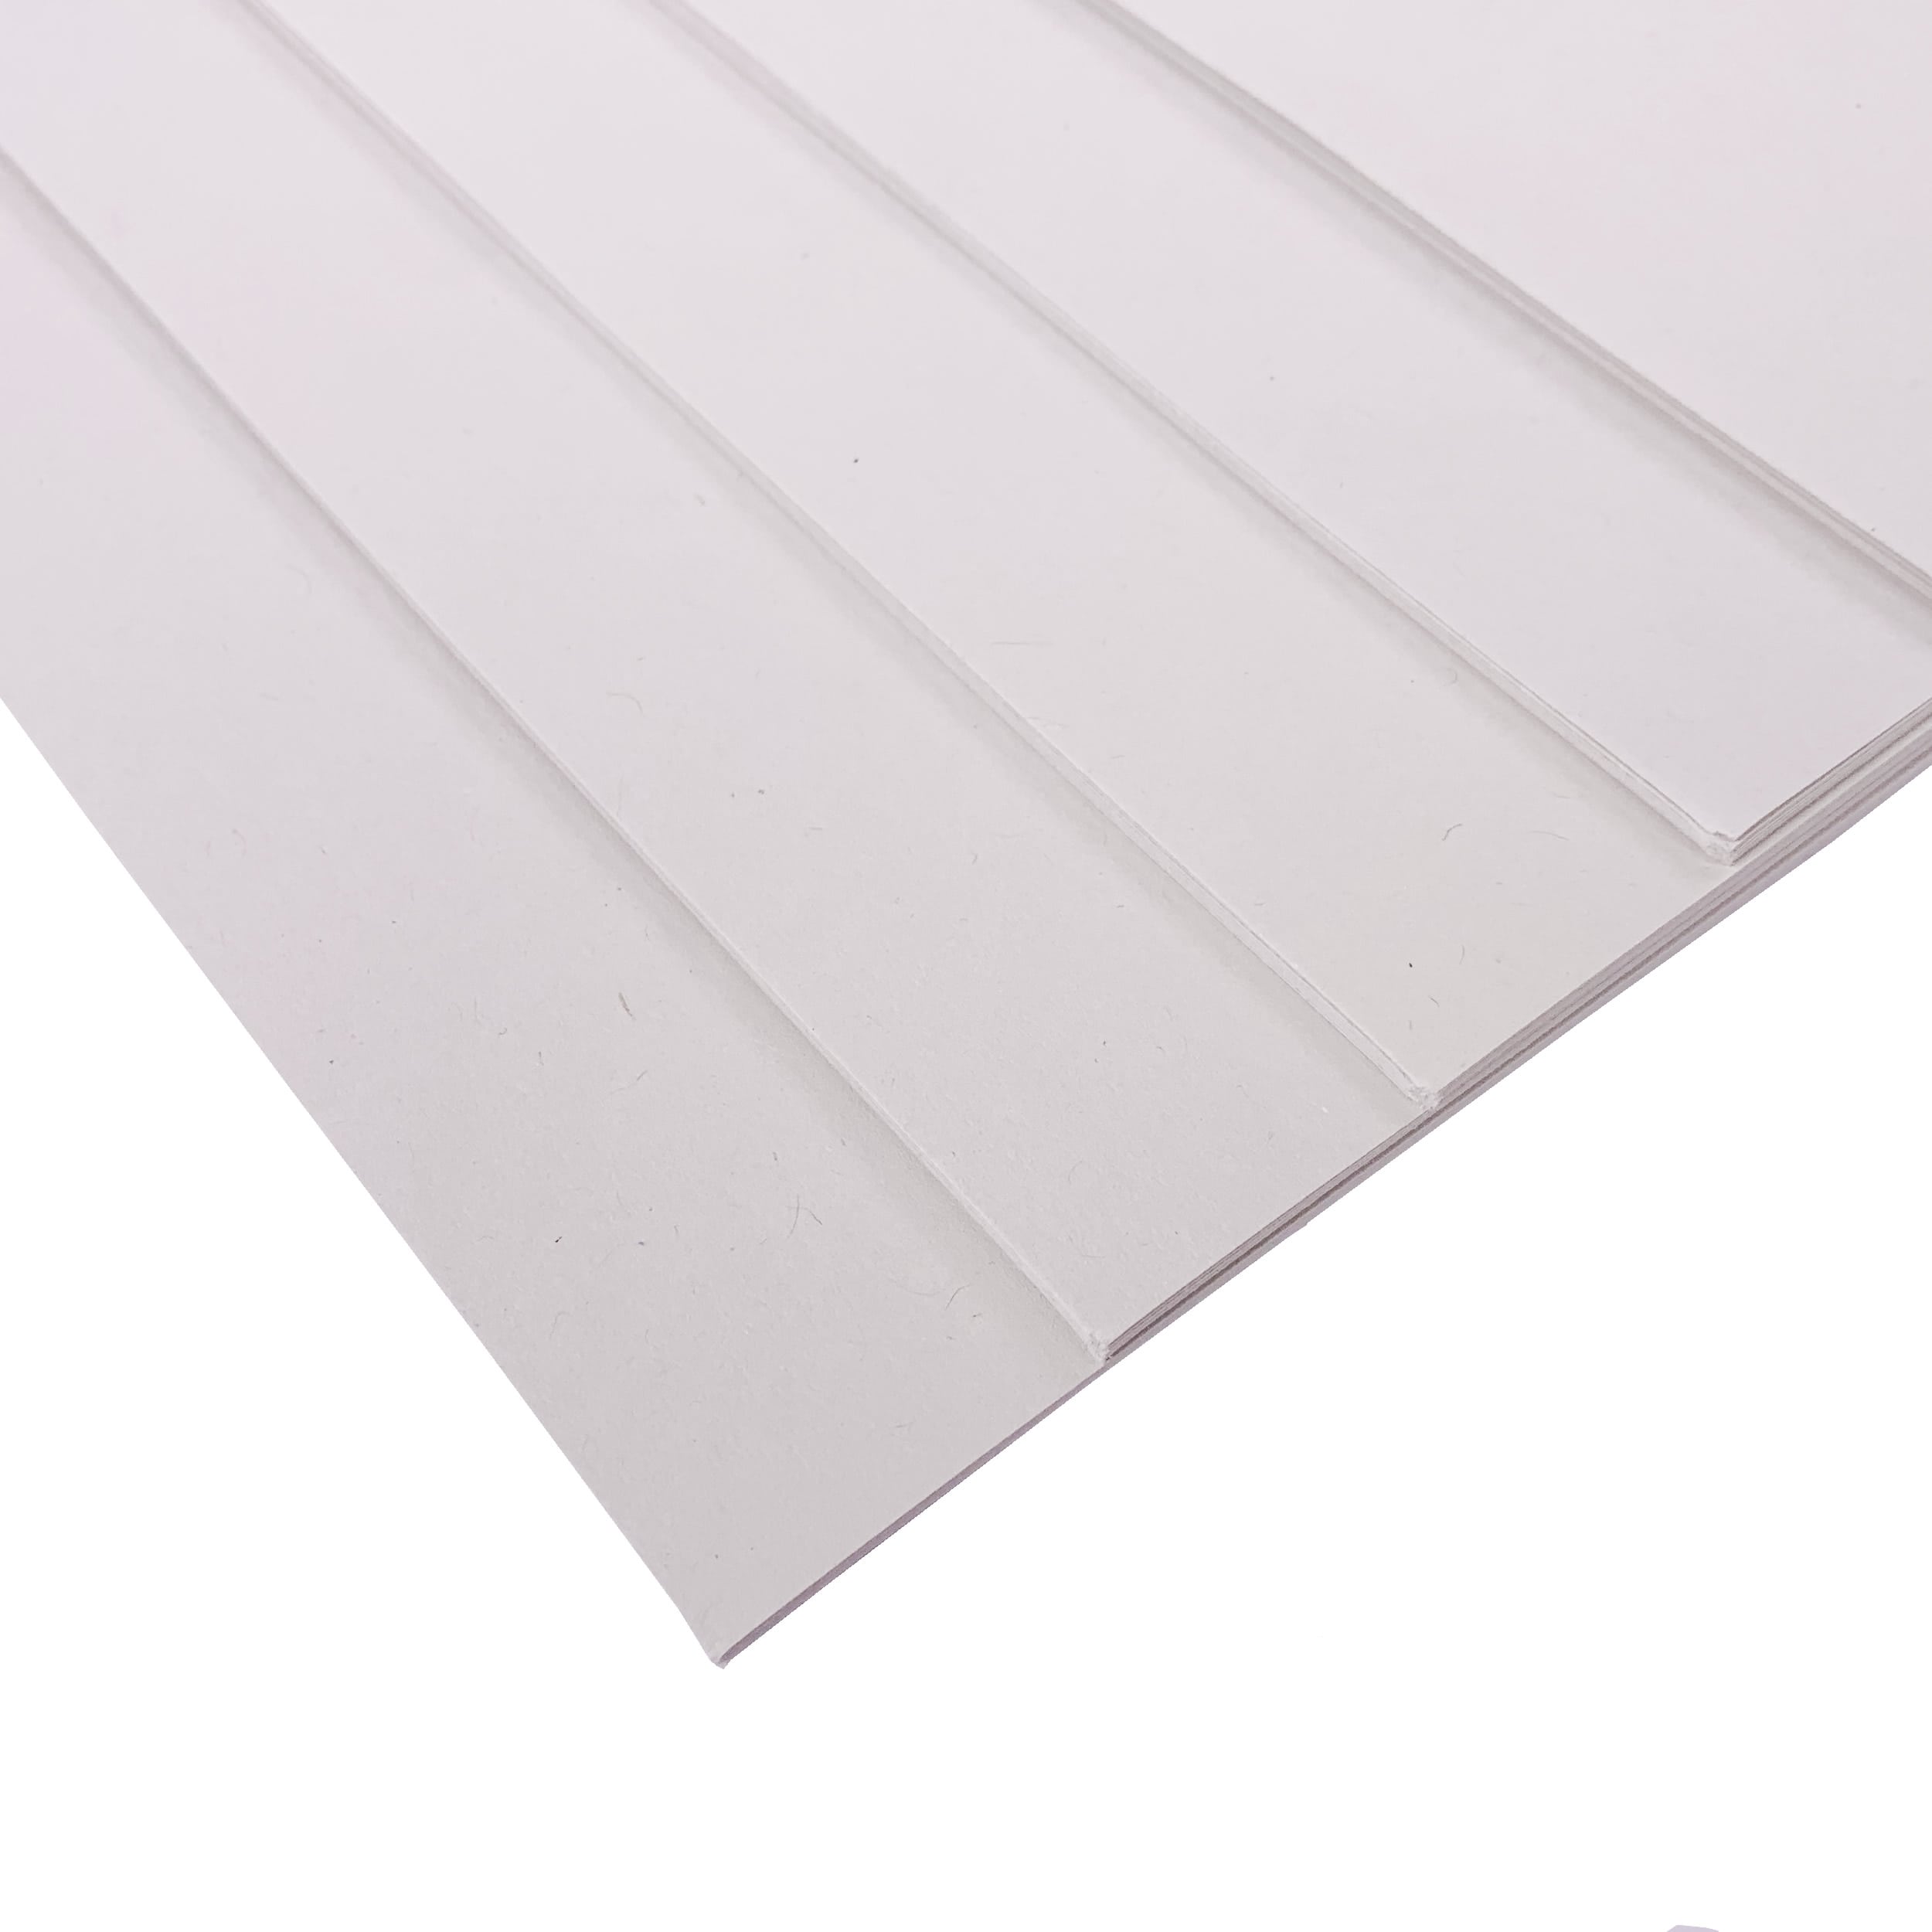 White Office Paper, 100% Recycled